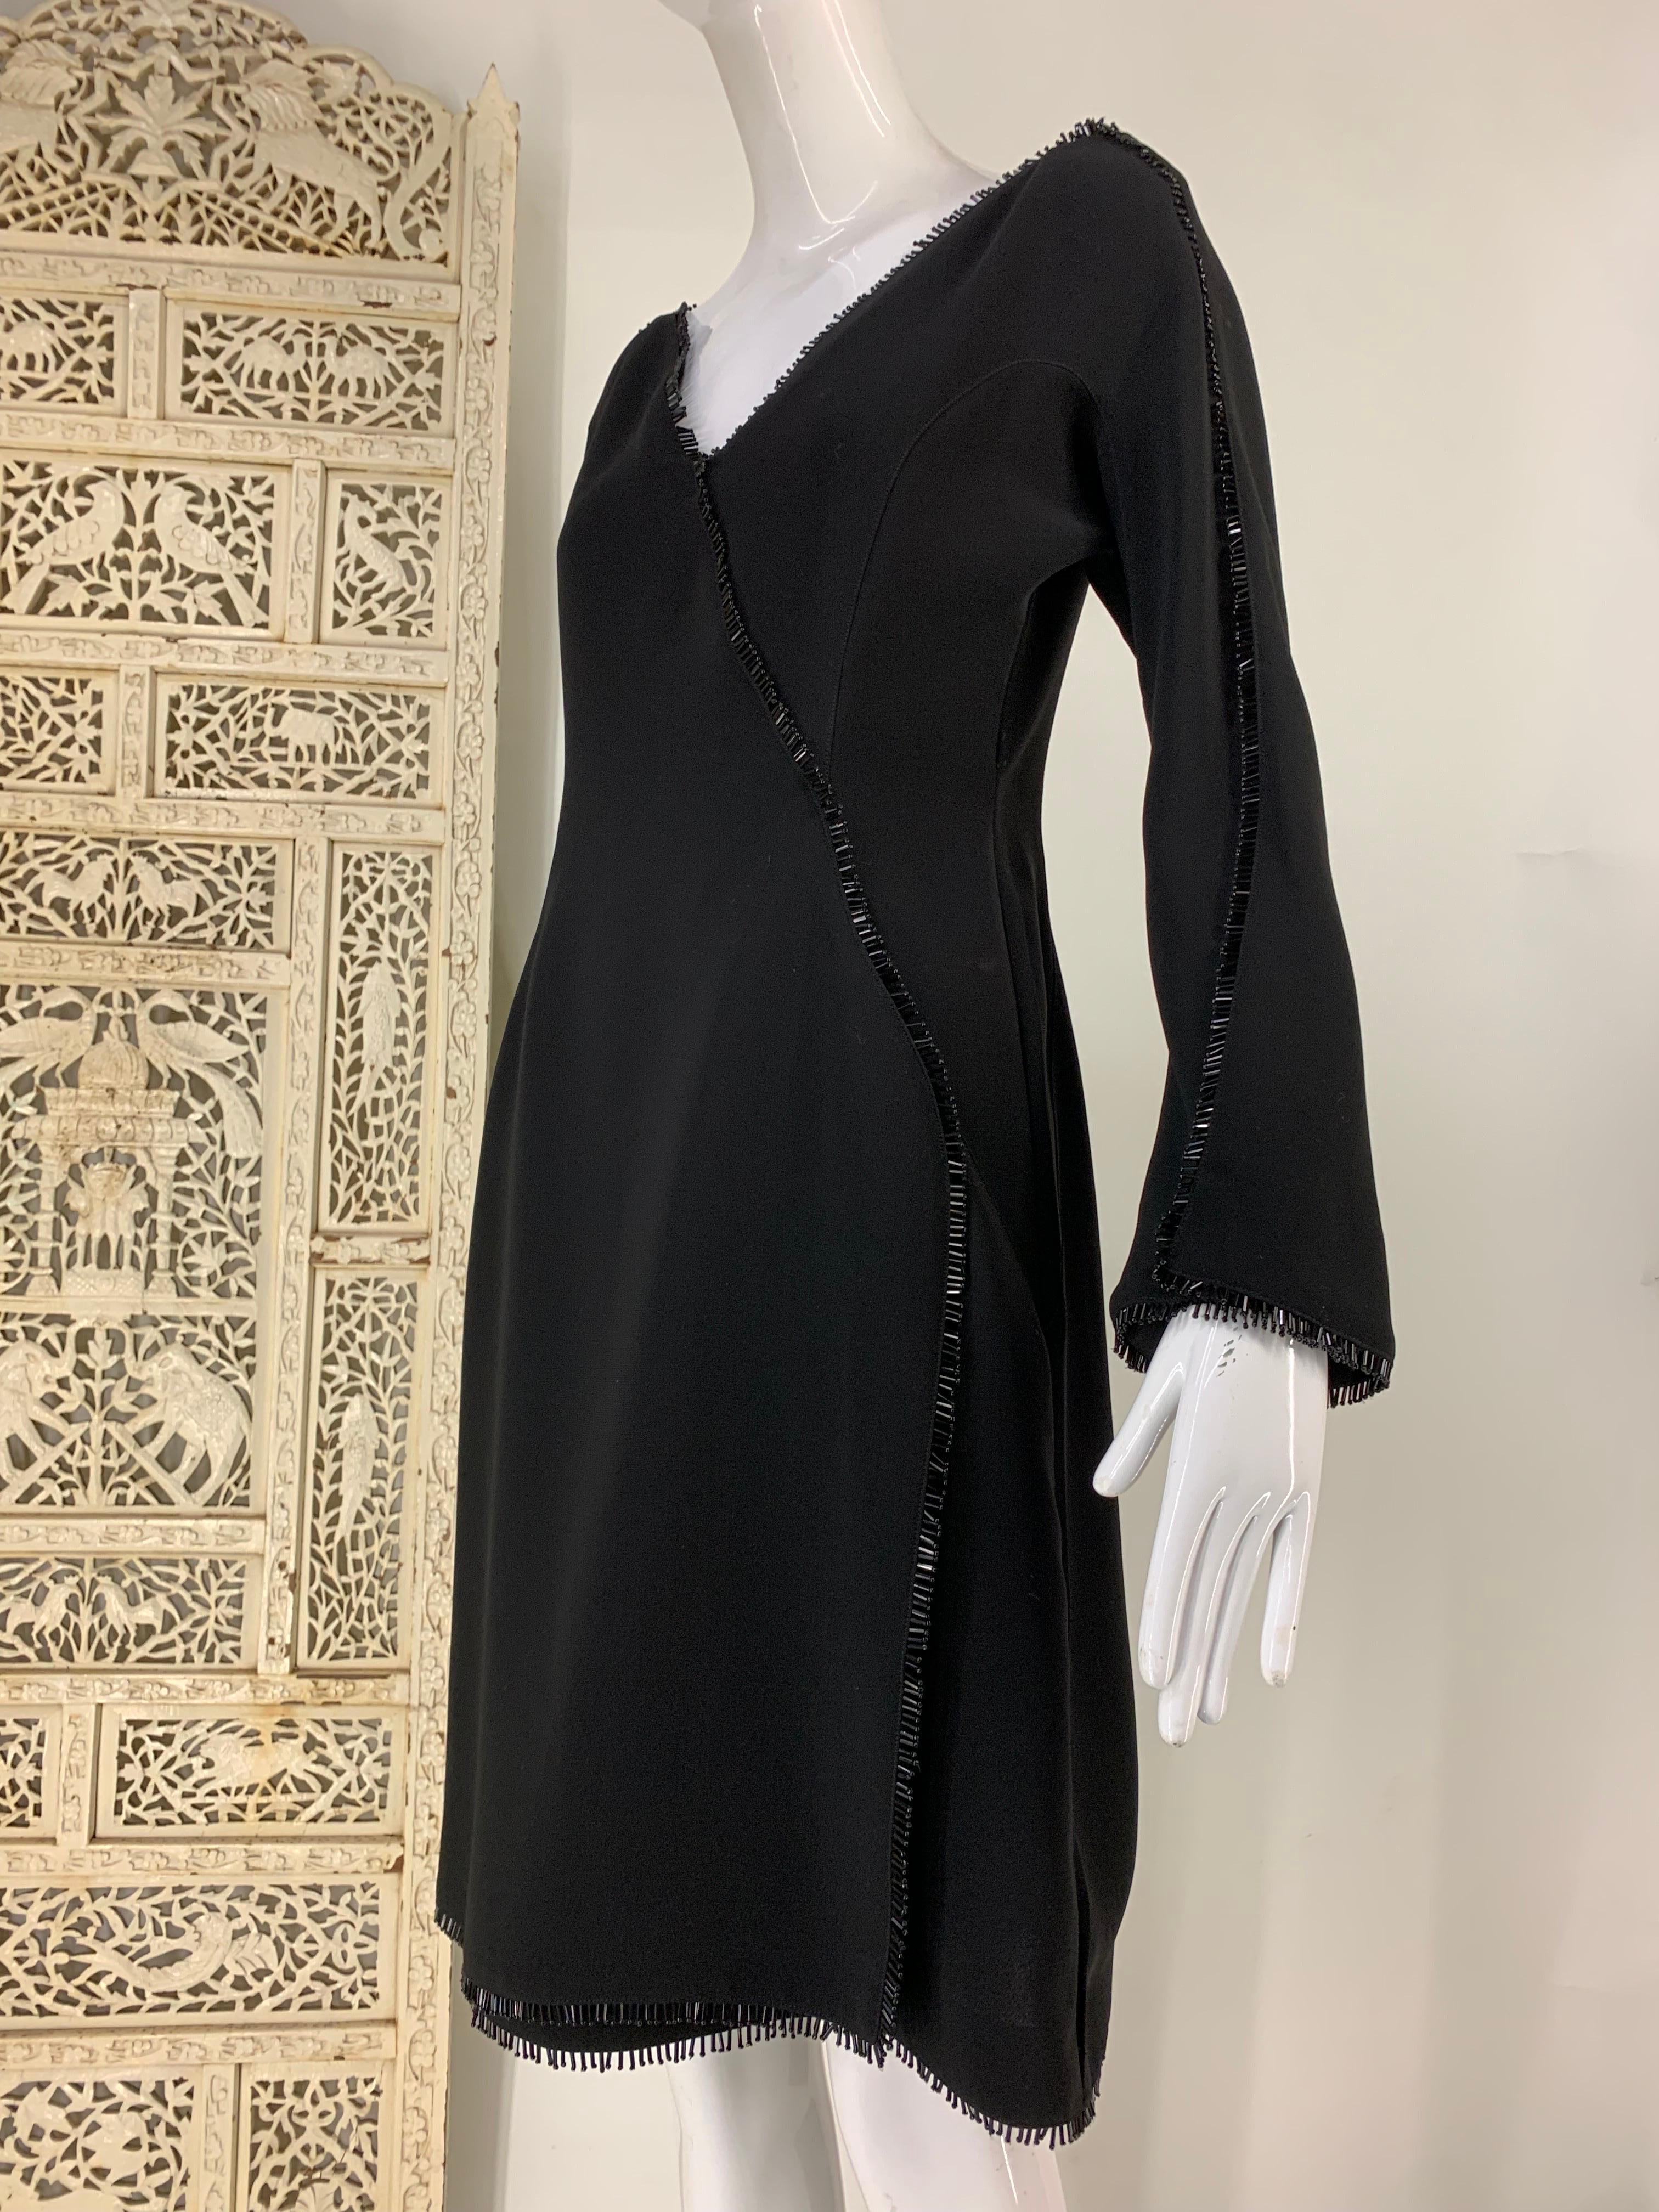 1990s Thierry Mugler Fit & Flare Wrap Style Black Cocktail Dress w Bead Fringe  For Sale 6